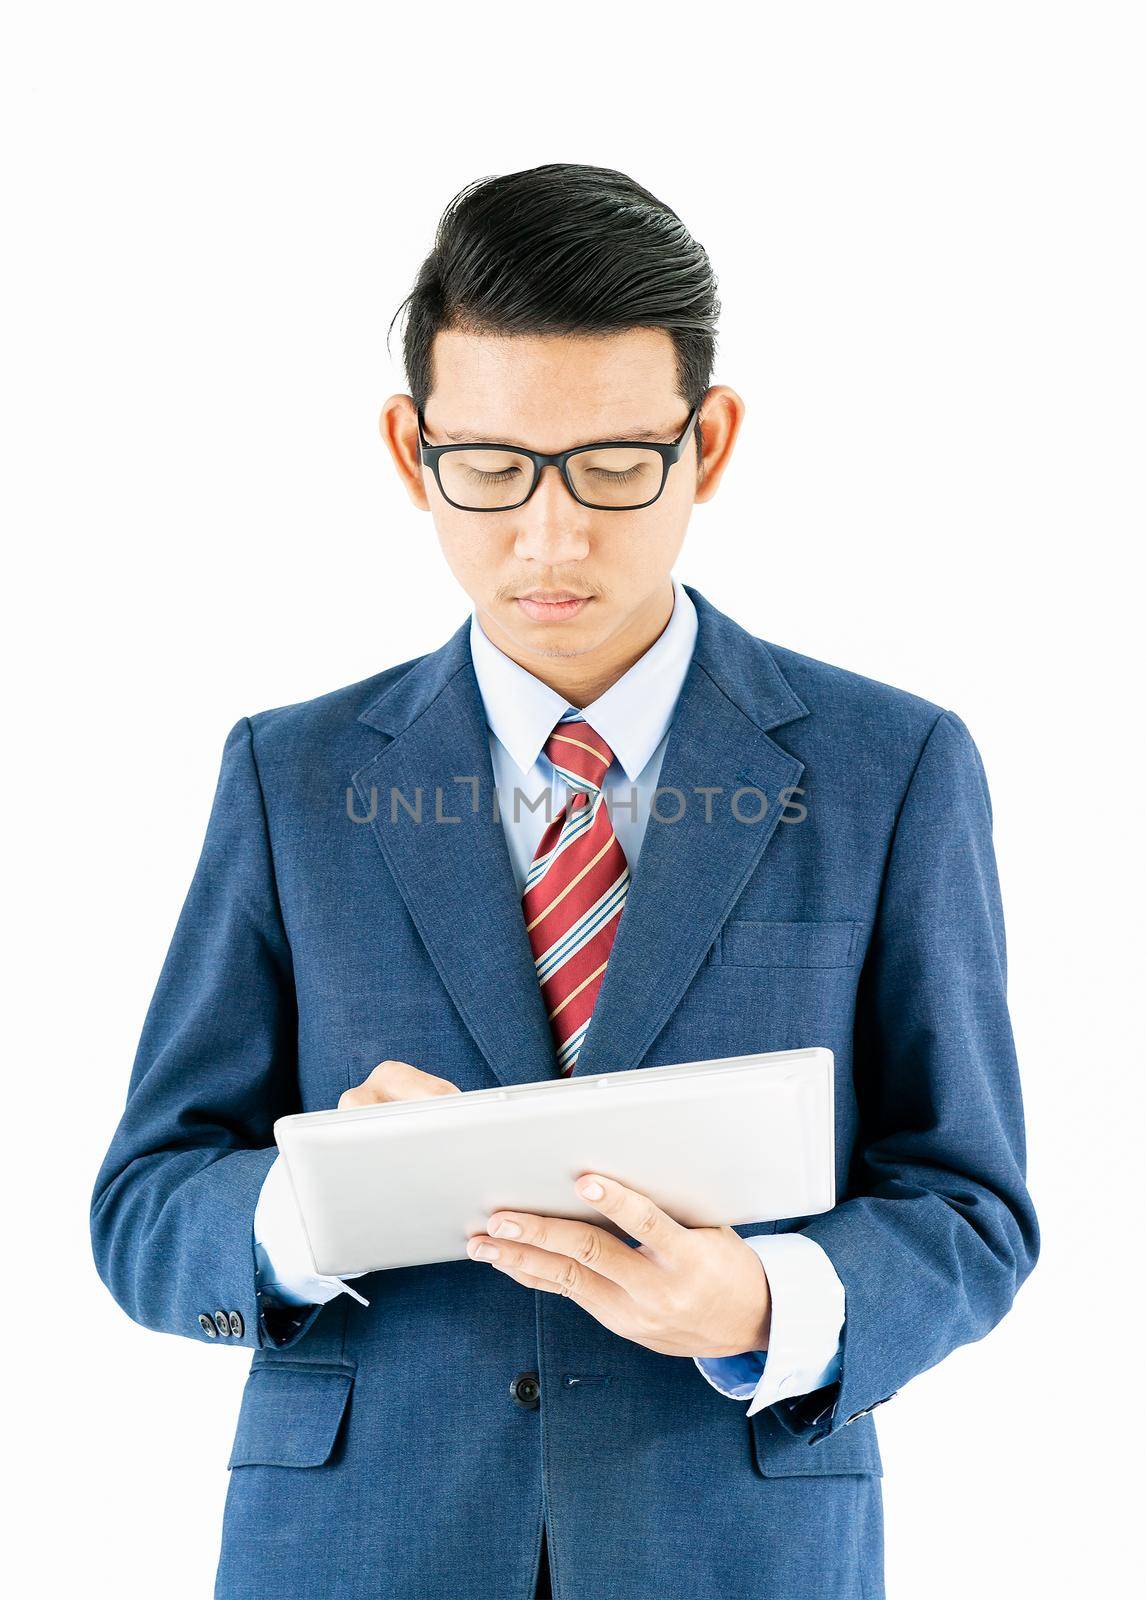 Businessman portrait in suit holding a laptop over white background by stoonn